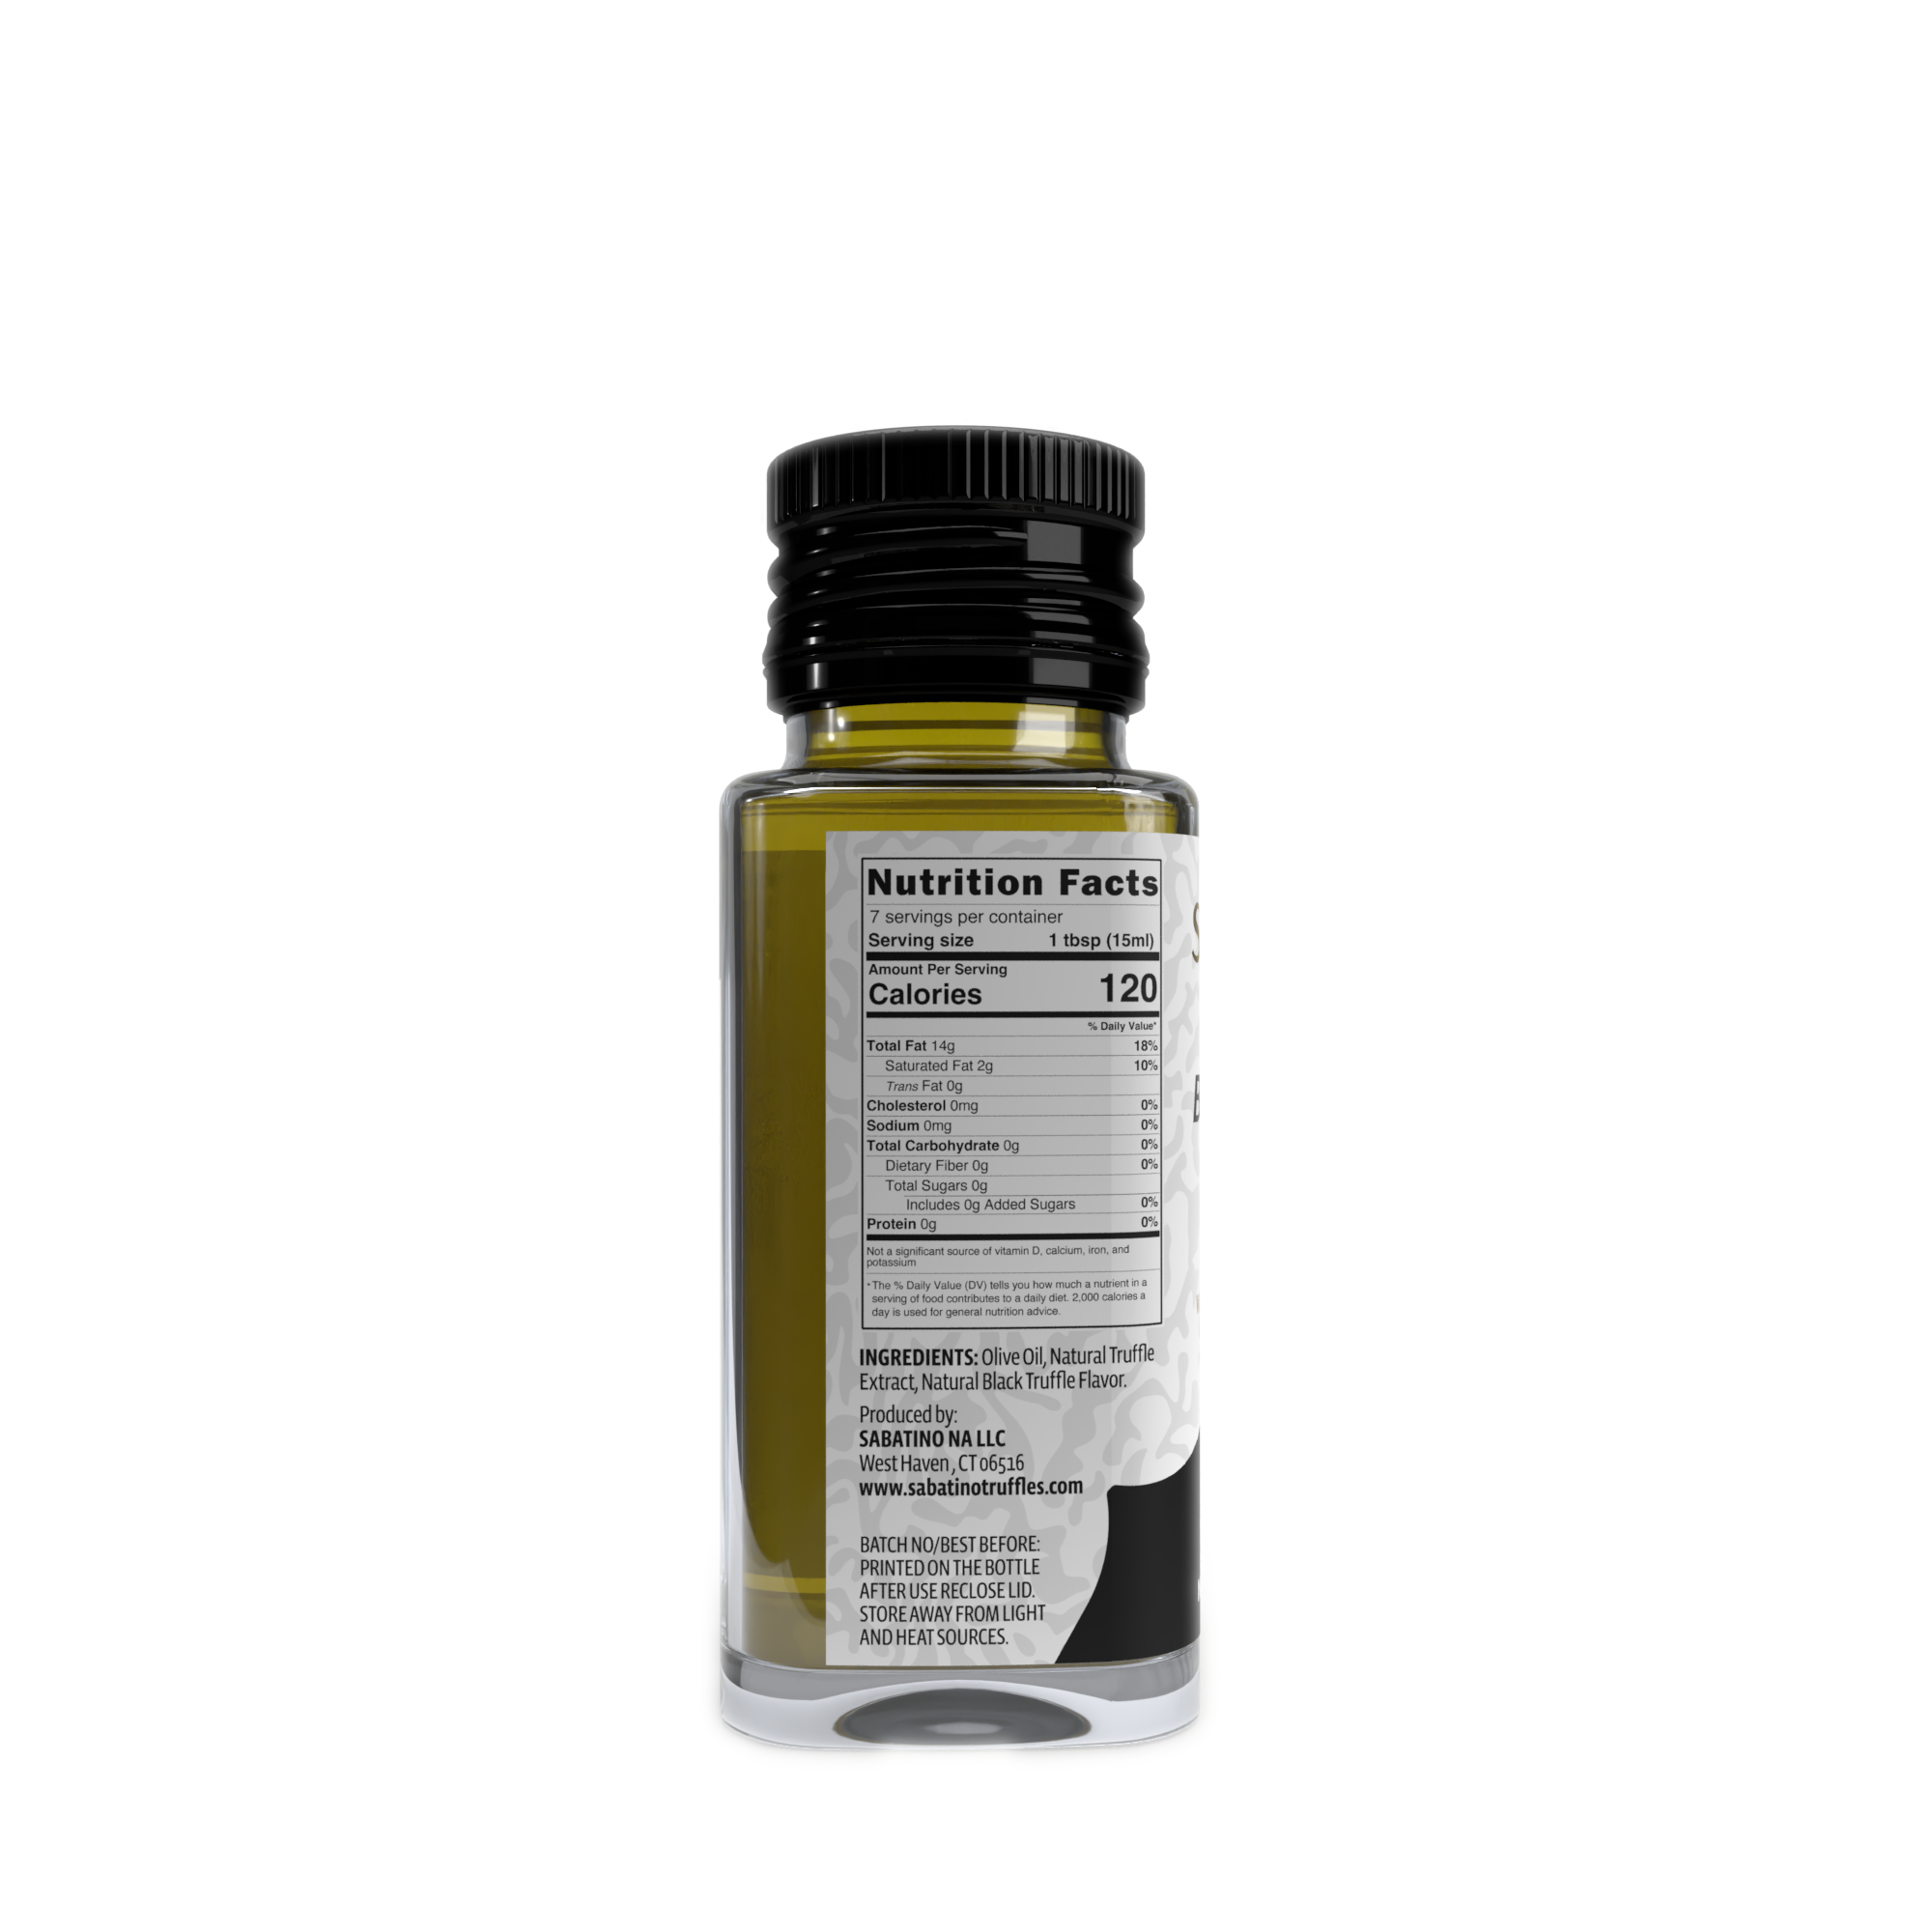 All Natural Black Truffle Infused Oil - 3.4 fl oz side of pot